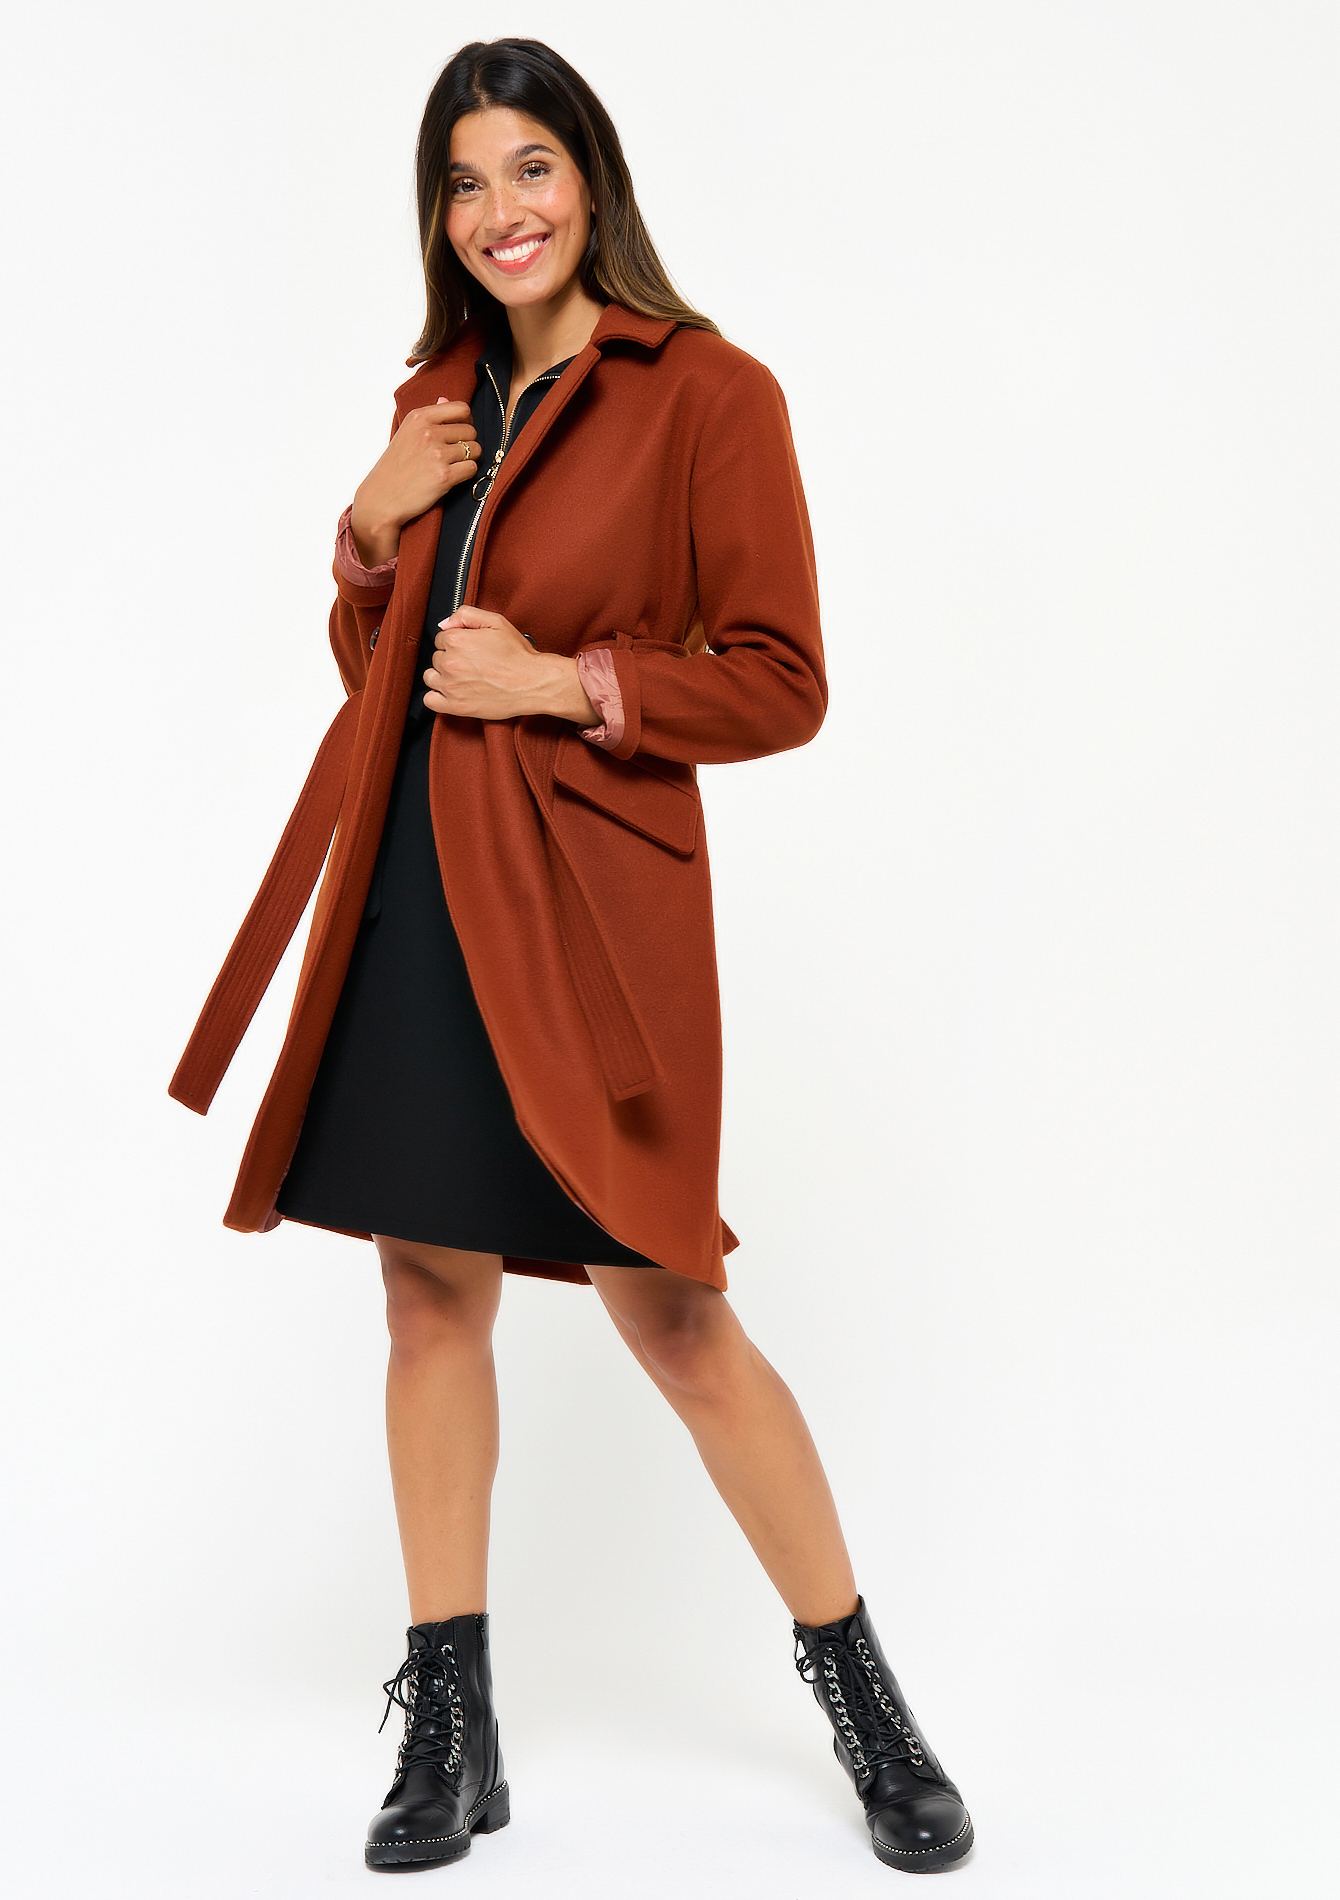 Long coat with belt - RED HENA - 23000348_1296